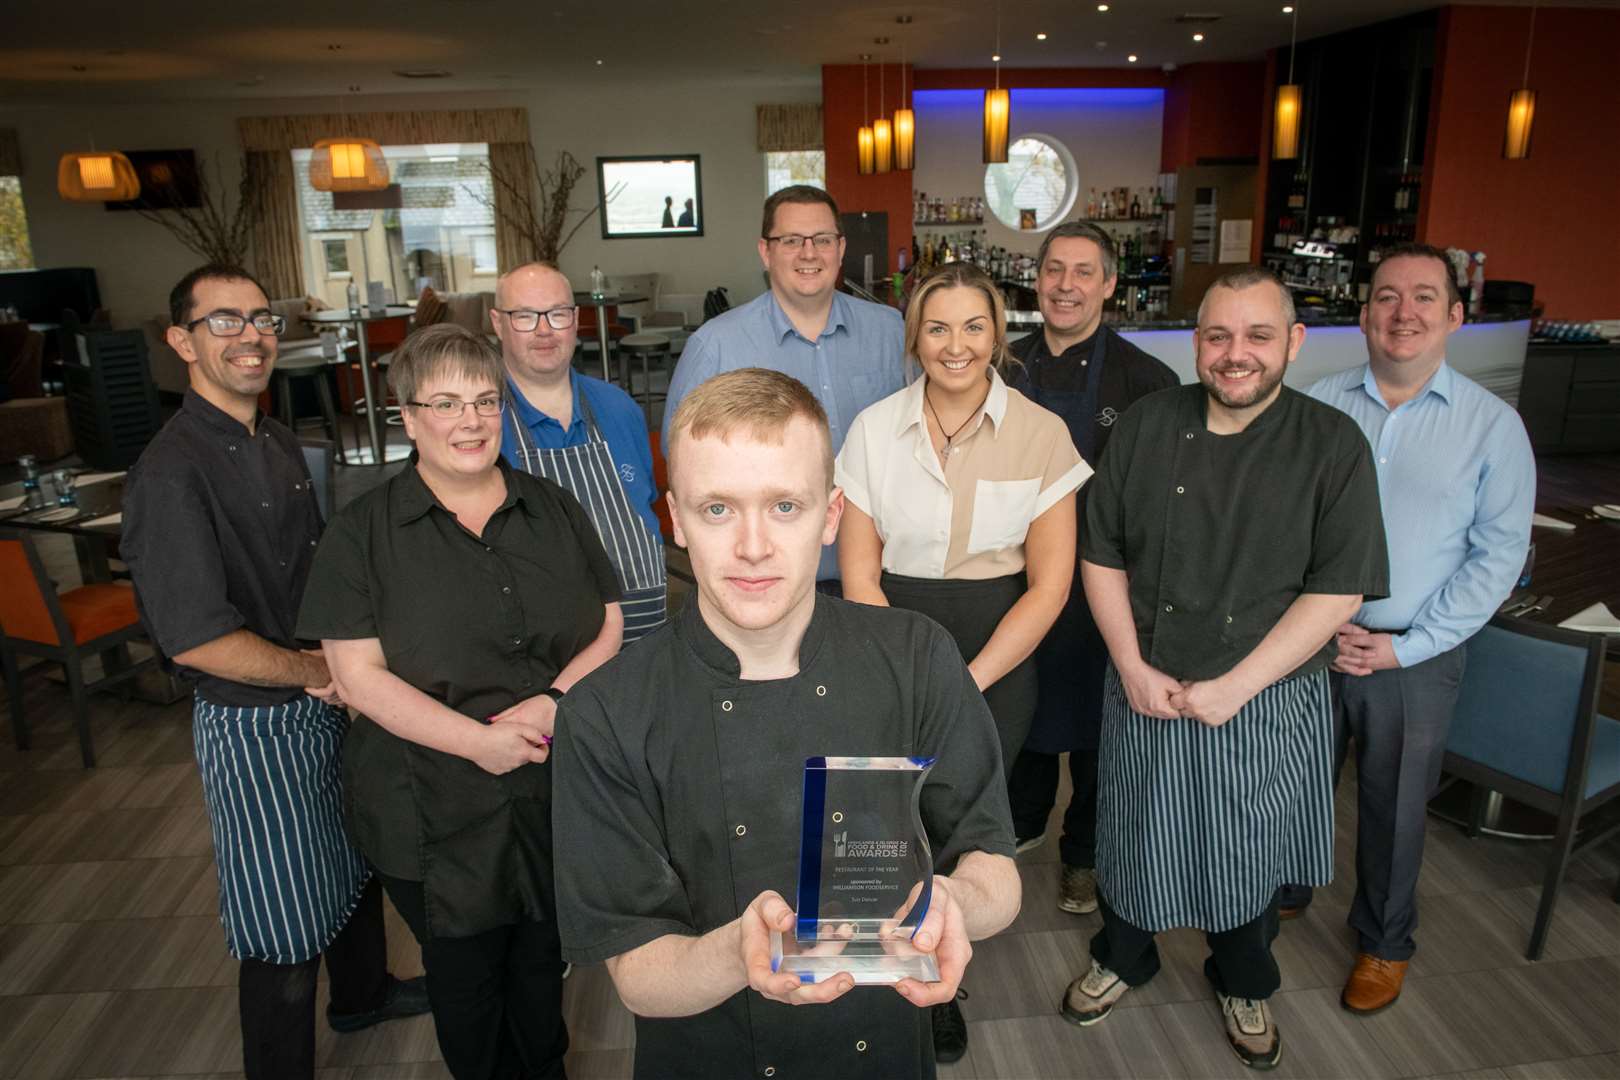 The team at The Sun Dancer restaurant are delighted with their latest award win. Picture: Callum Mackay